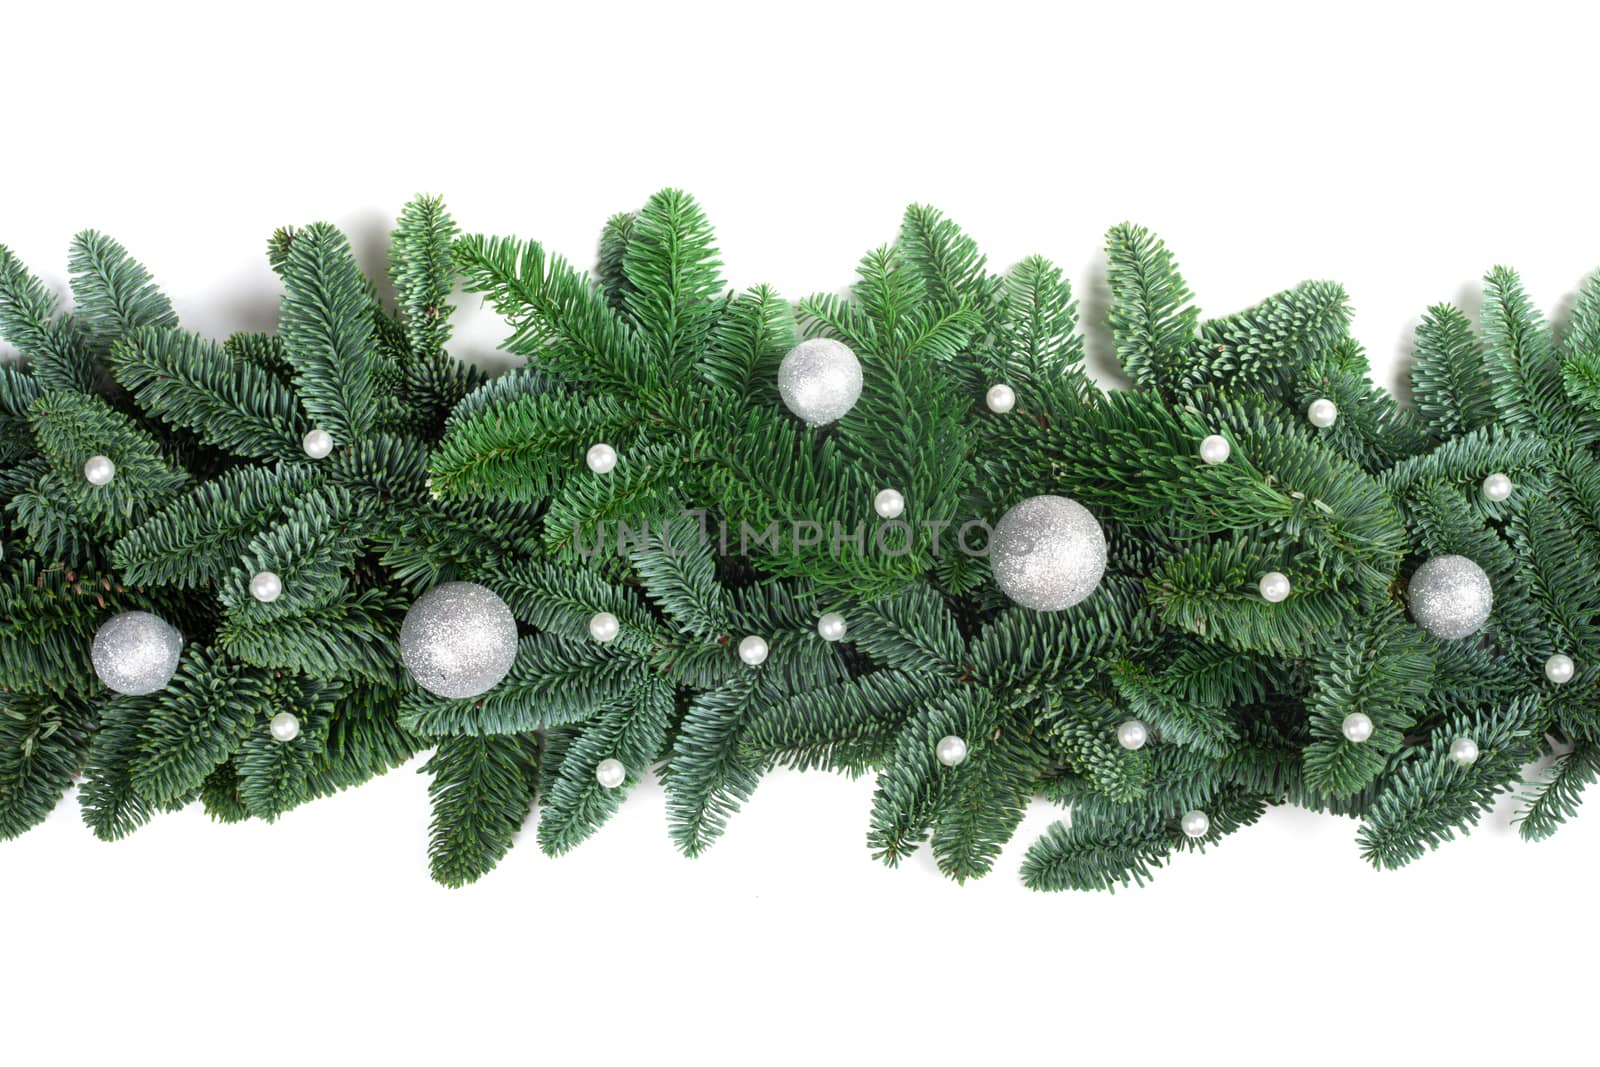 Christmas Border frame of natural noble fir tree branches and silver baubles isolated on white background